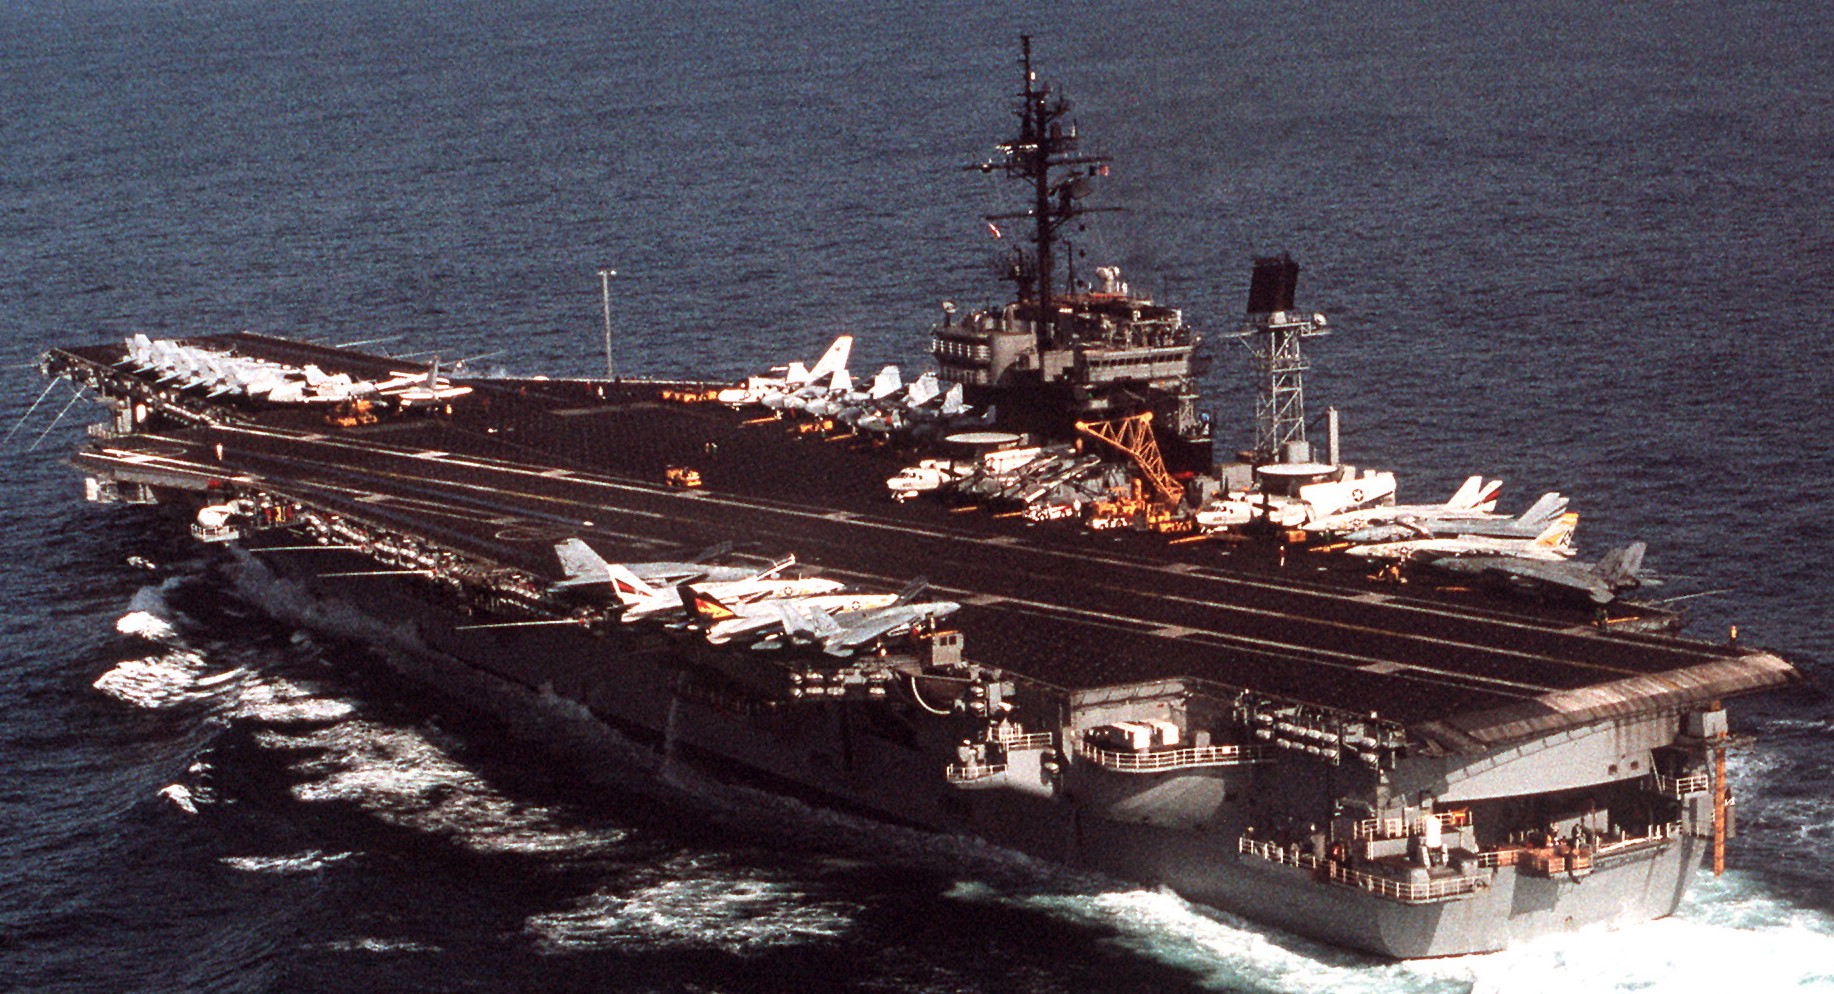 cv-64 uss constellation kitty hawk class aircraft carrier air wing cvw-14 us navy pacex 1989 pacific 101